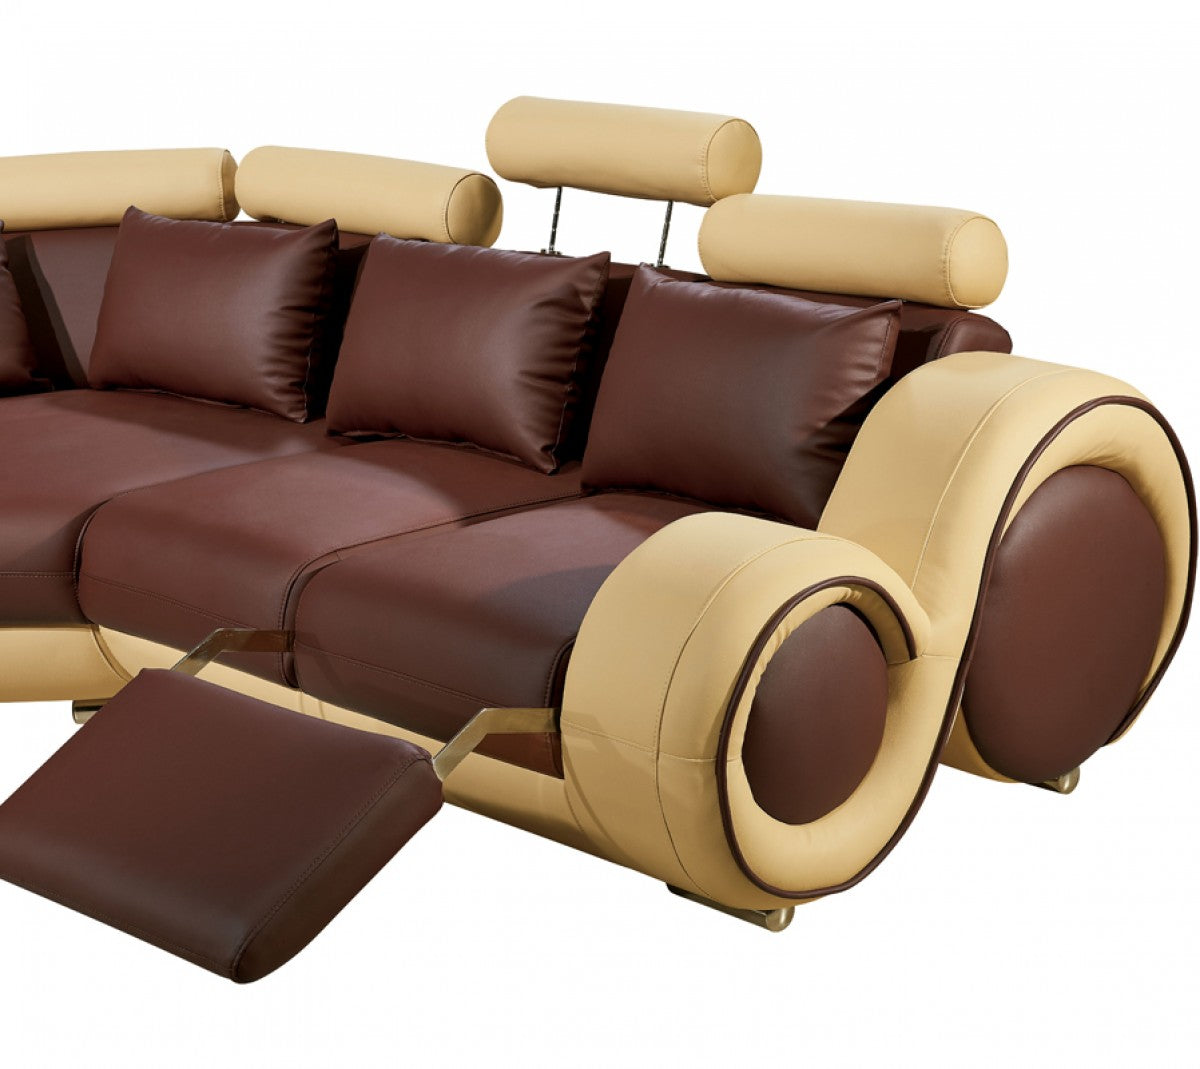 Modern Leather Sectional Sofa With